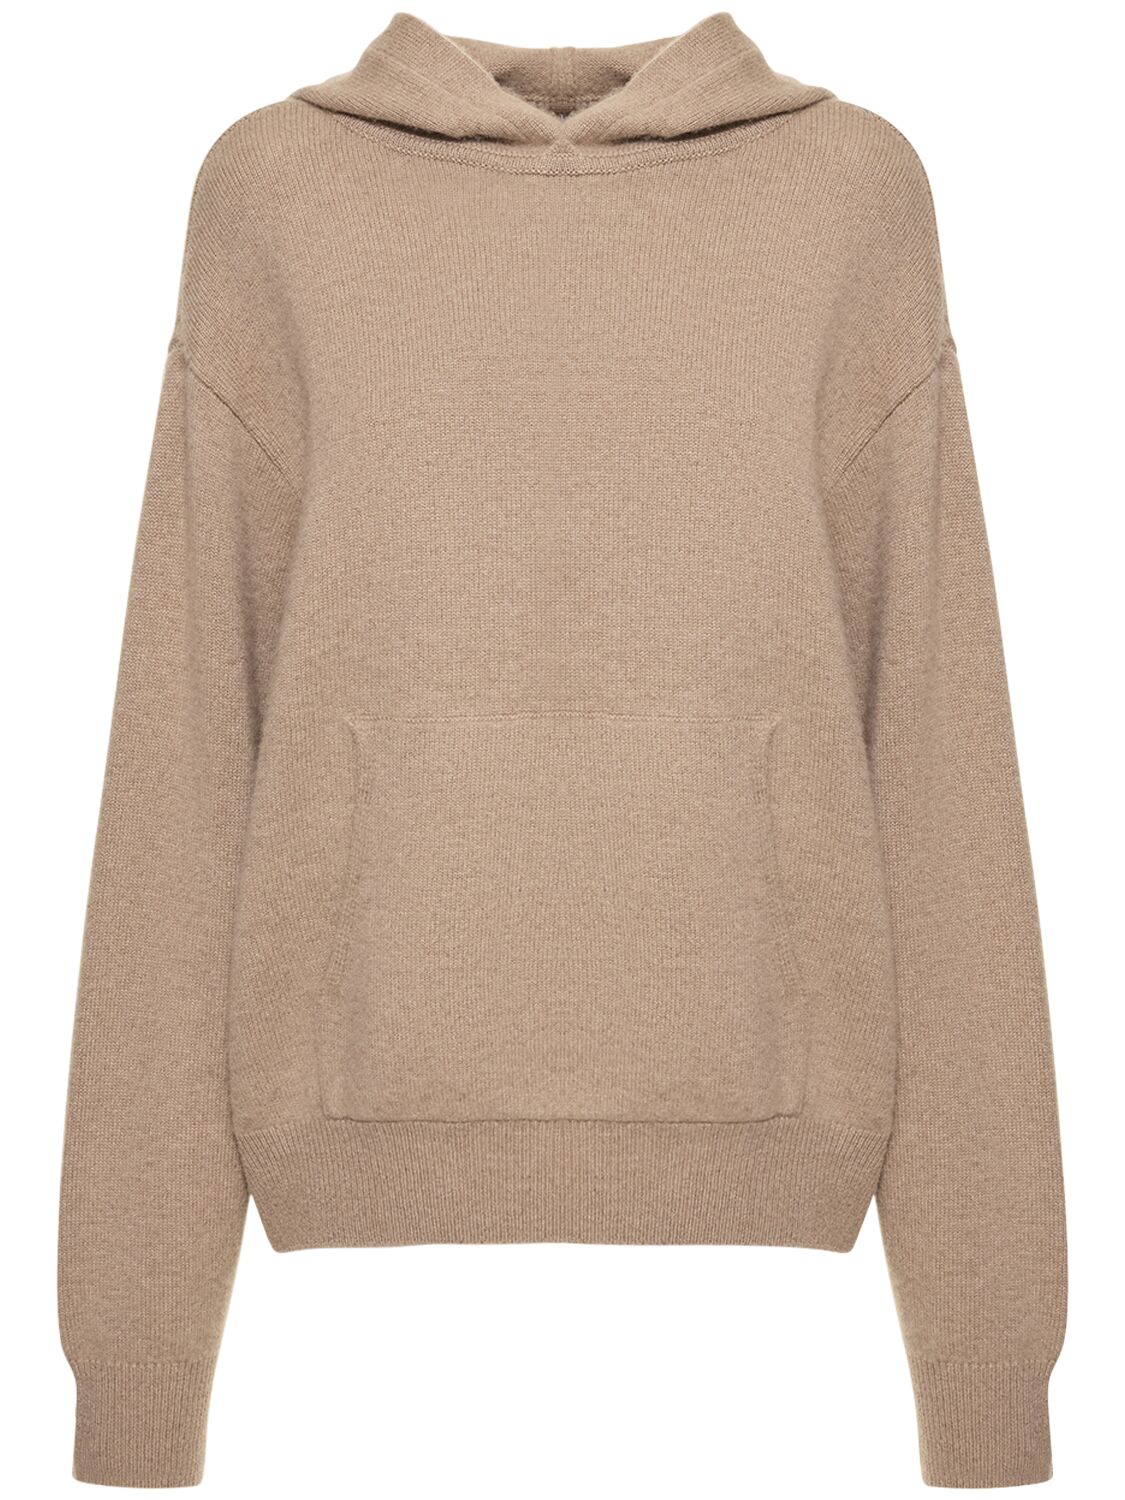 The Lindsey Hoodie Cashmere Sweater